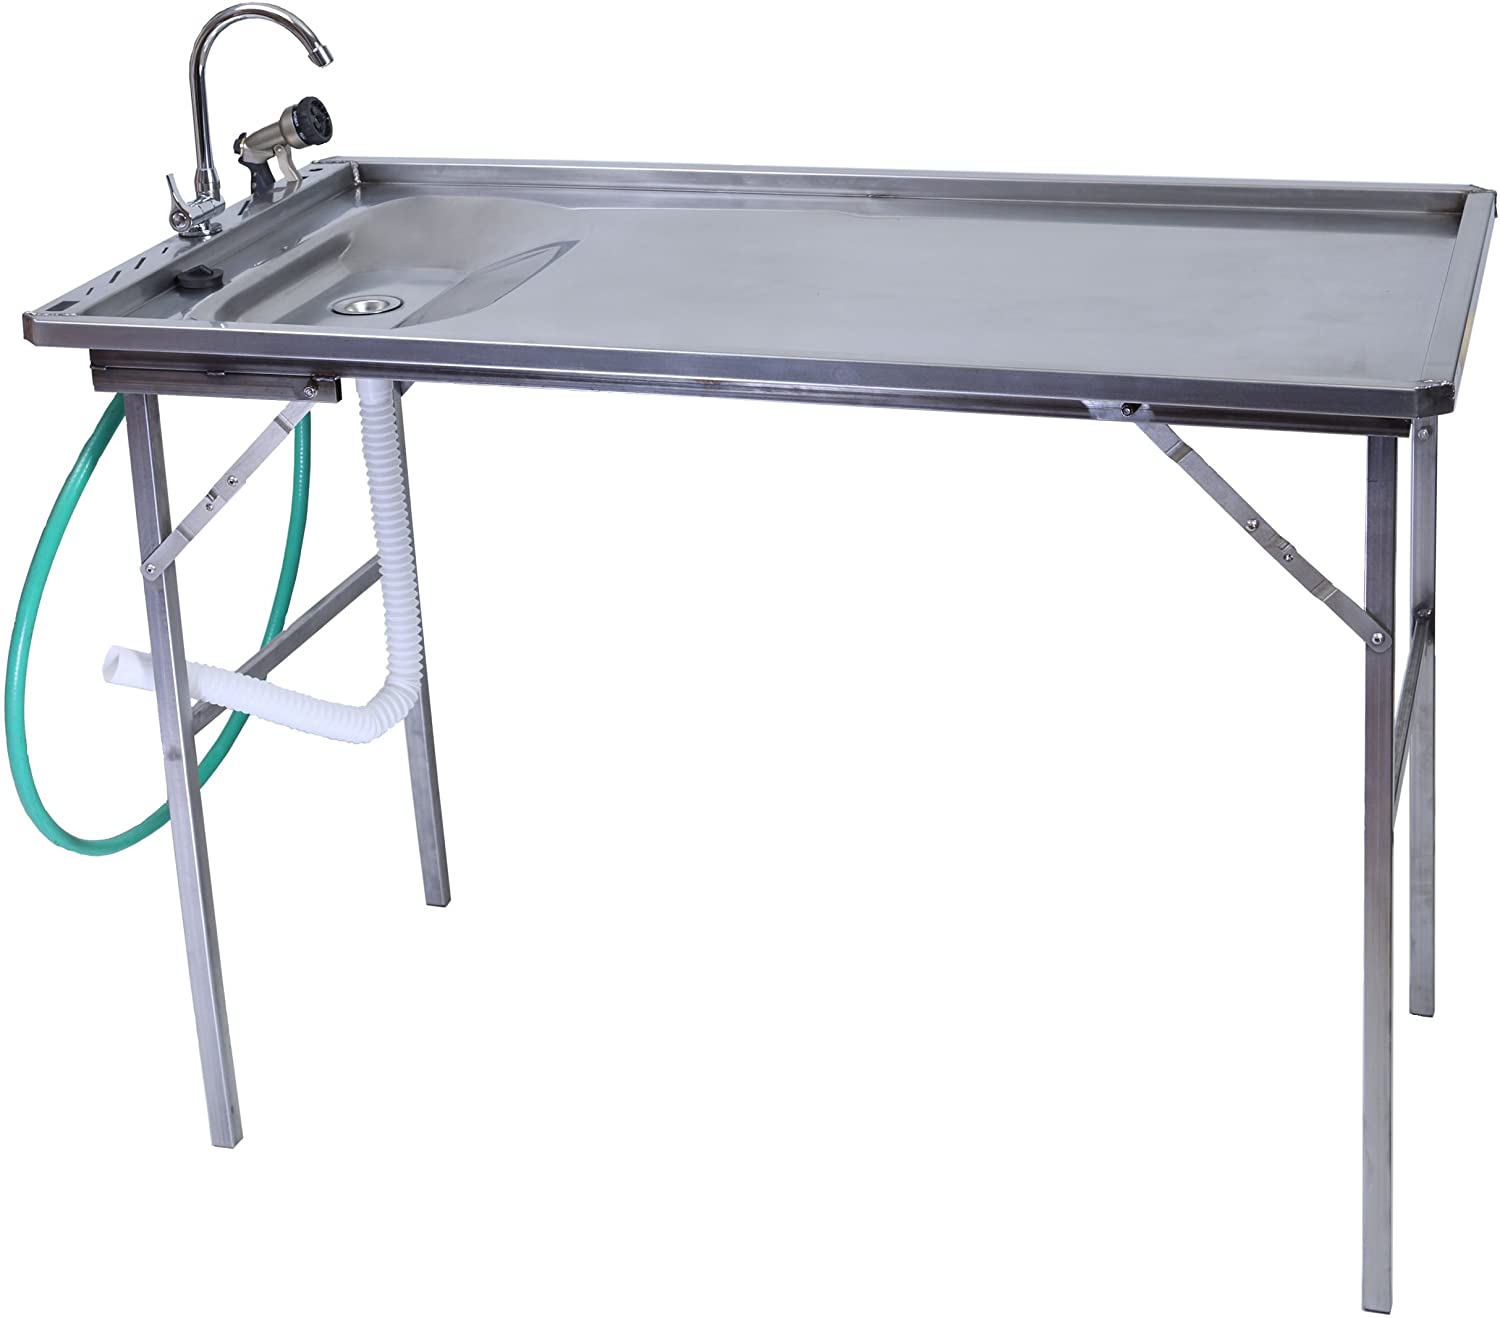 Organized Fishing's stanless steel folding fish cleaning table